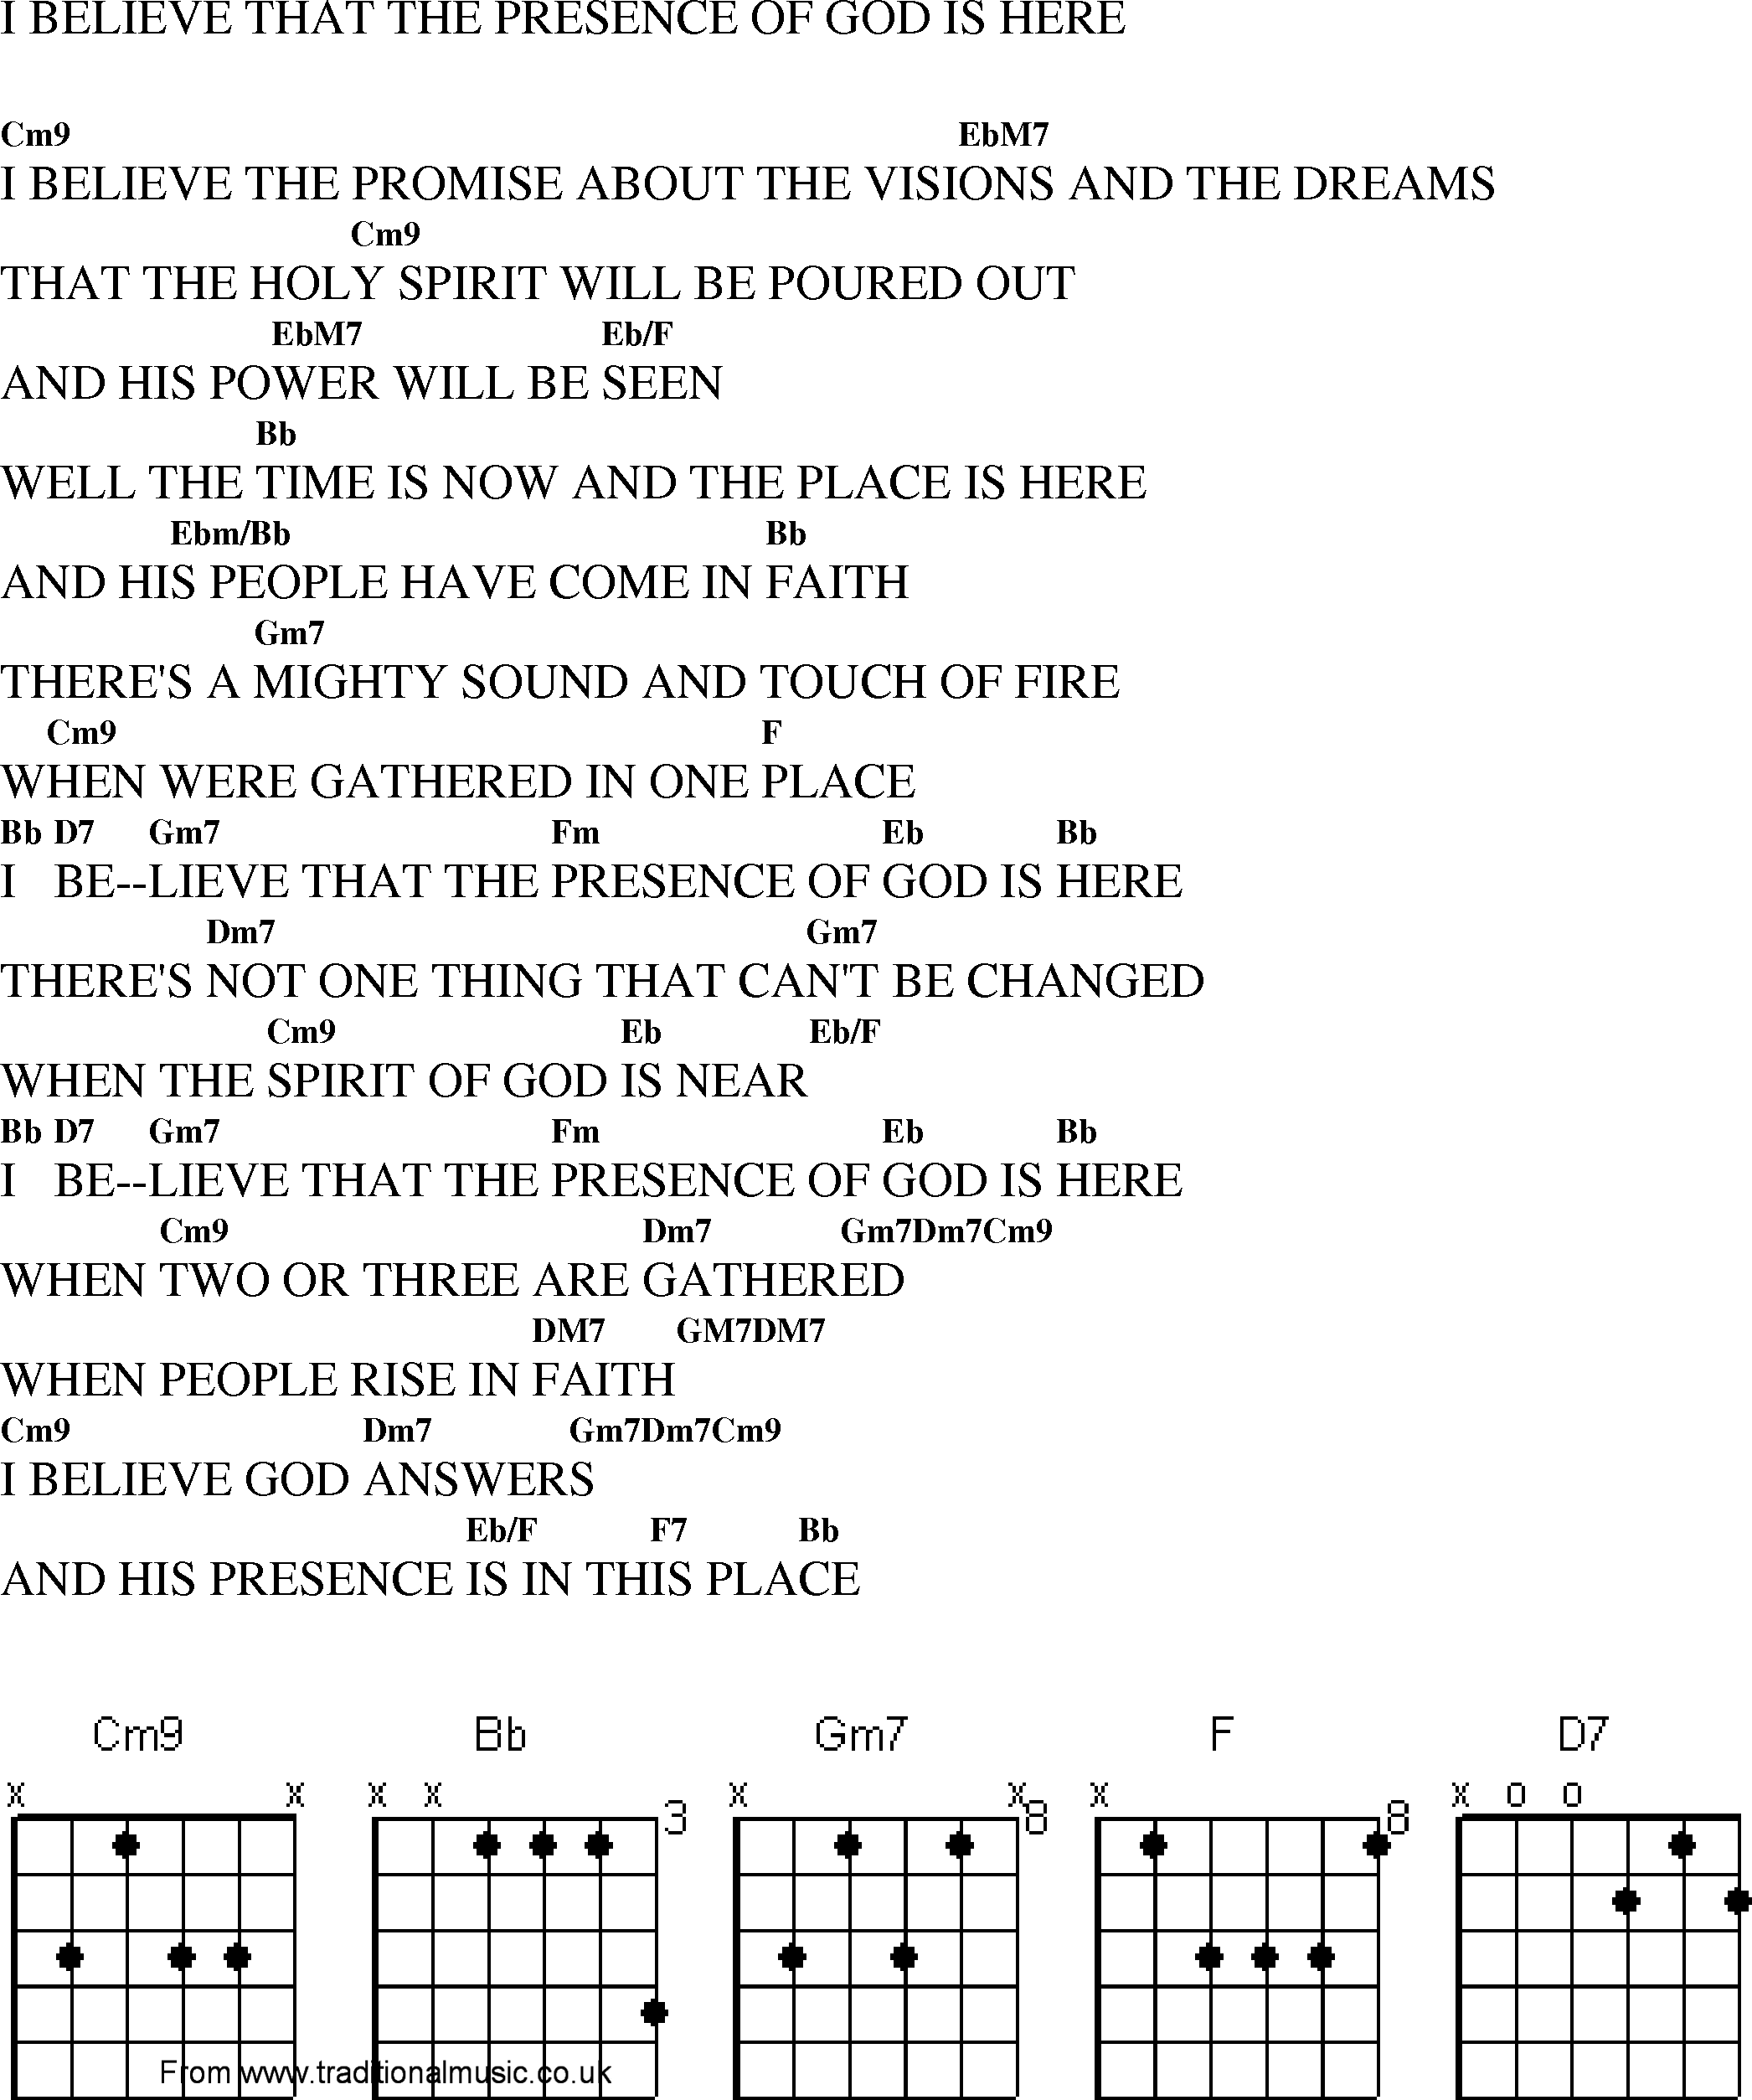 Gospel Song: i_believe_that_the_presence_of_god_is_here, lyrics and chords.